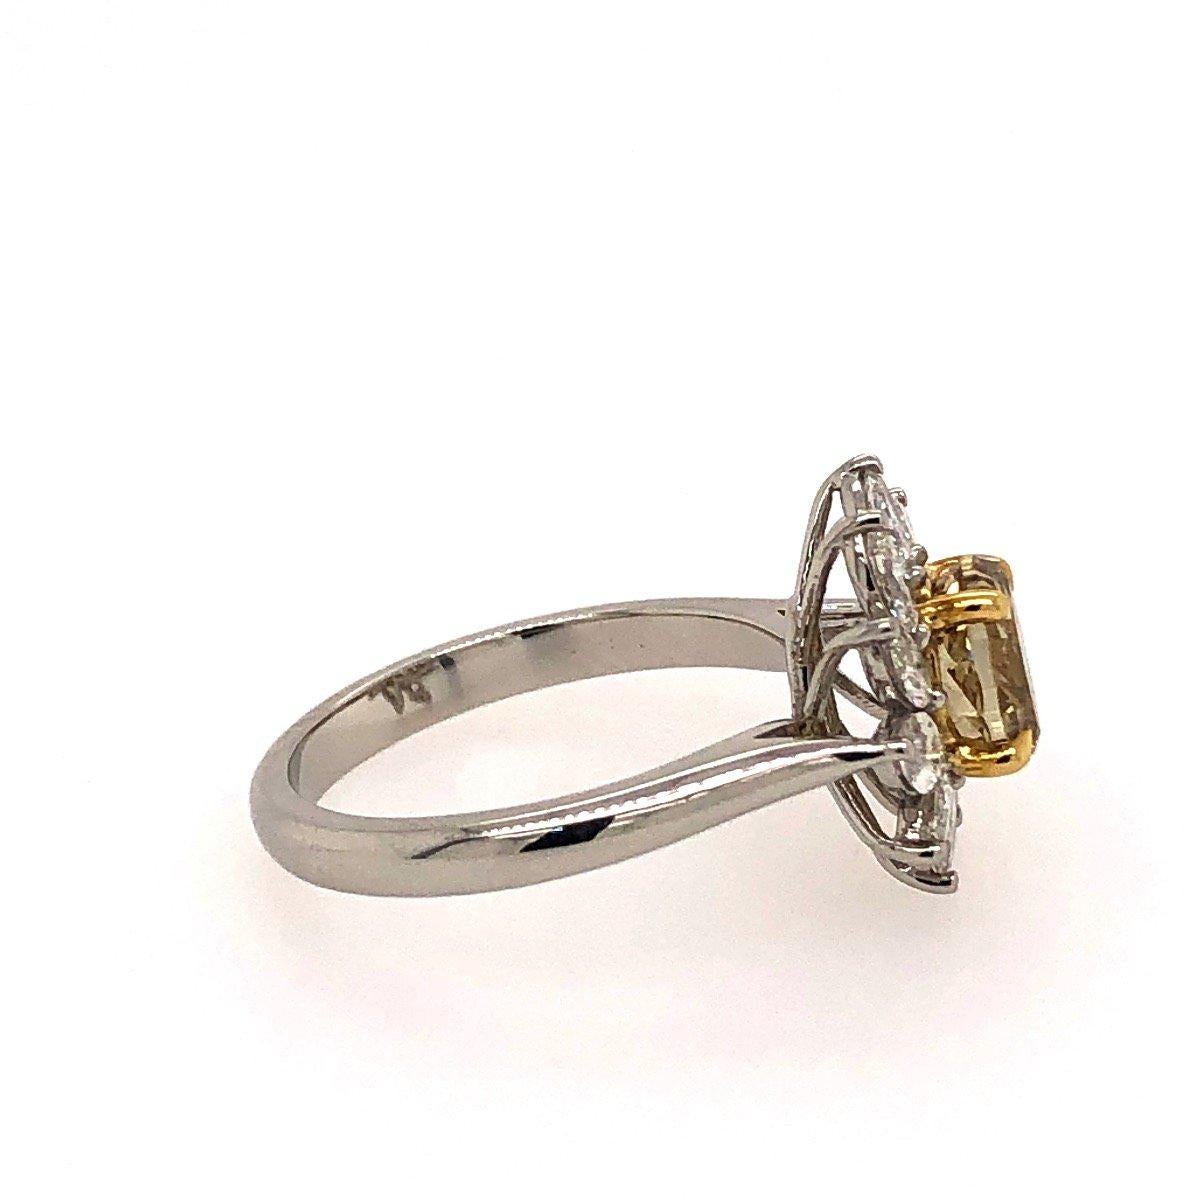 This unique flower star style ring with brownish yellow diamond and slanted Marquise diamonds. Metal type: Platinum + 18kt Yellow Gold. The ring features 1.39 carat fancy Dark brown-yellow oval diamond and white marquise shaped diamond totaling 0.92